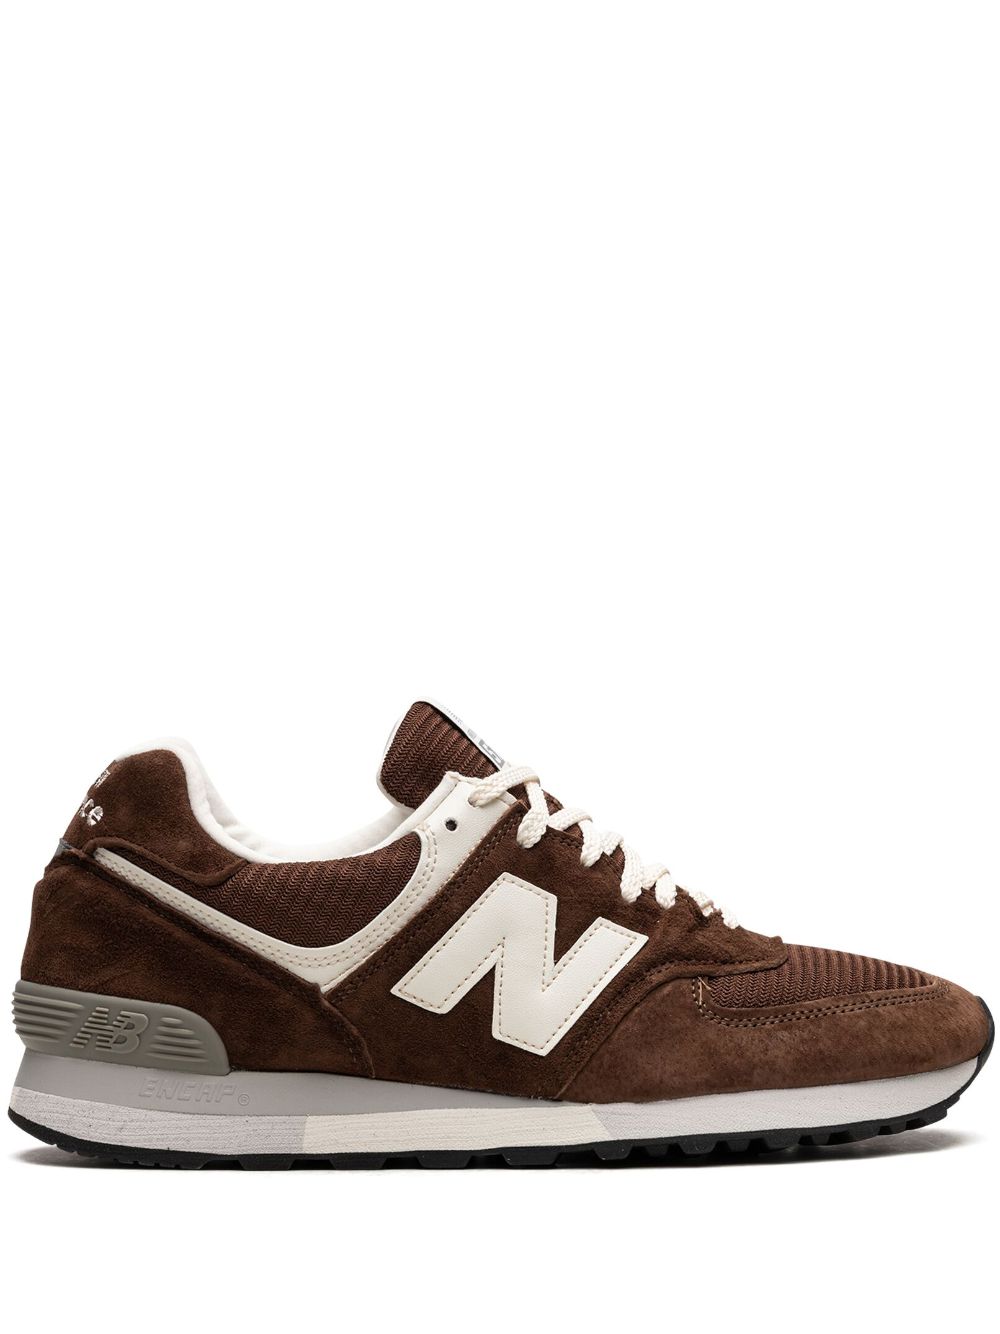 New Balance Made In UK 576 Sneakers - Farfetch